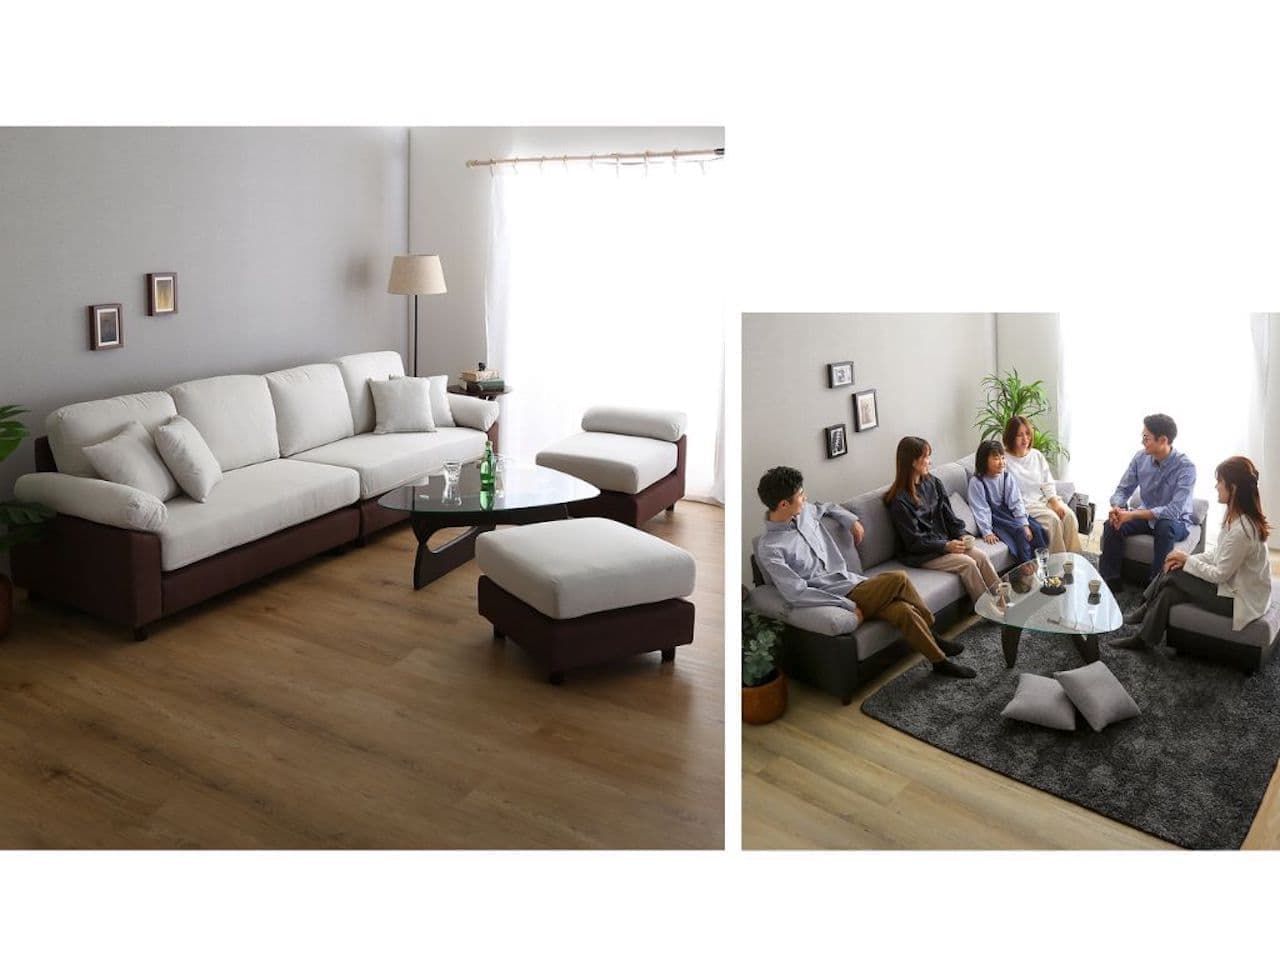 Nitori Net Limited “Upholstered two-tone 6-seater corner couch sofa” “PVC x upholstered 6-seater corner couch sofa”